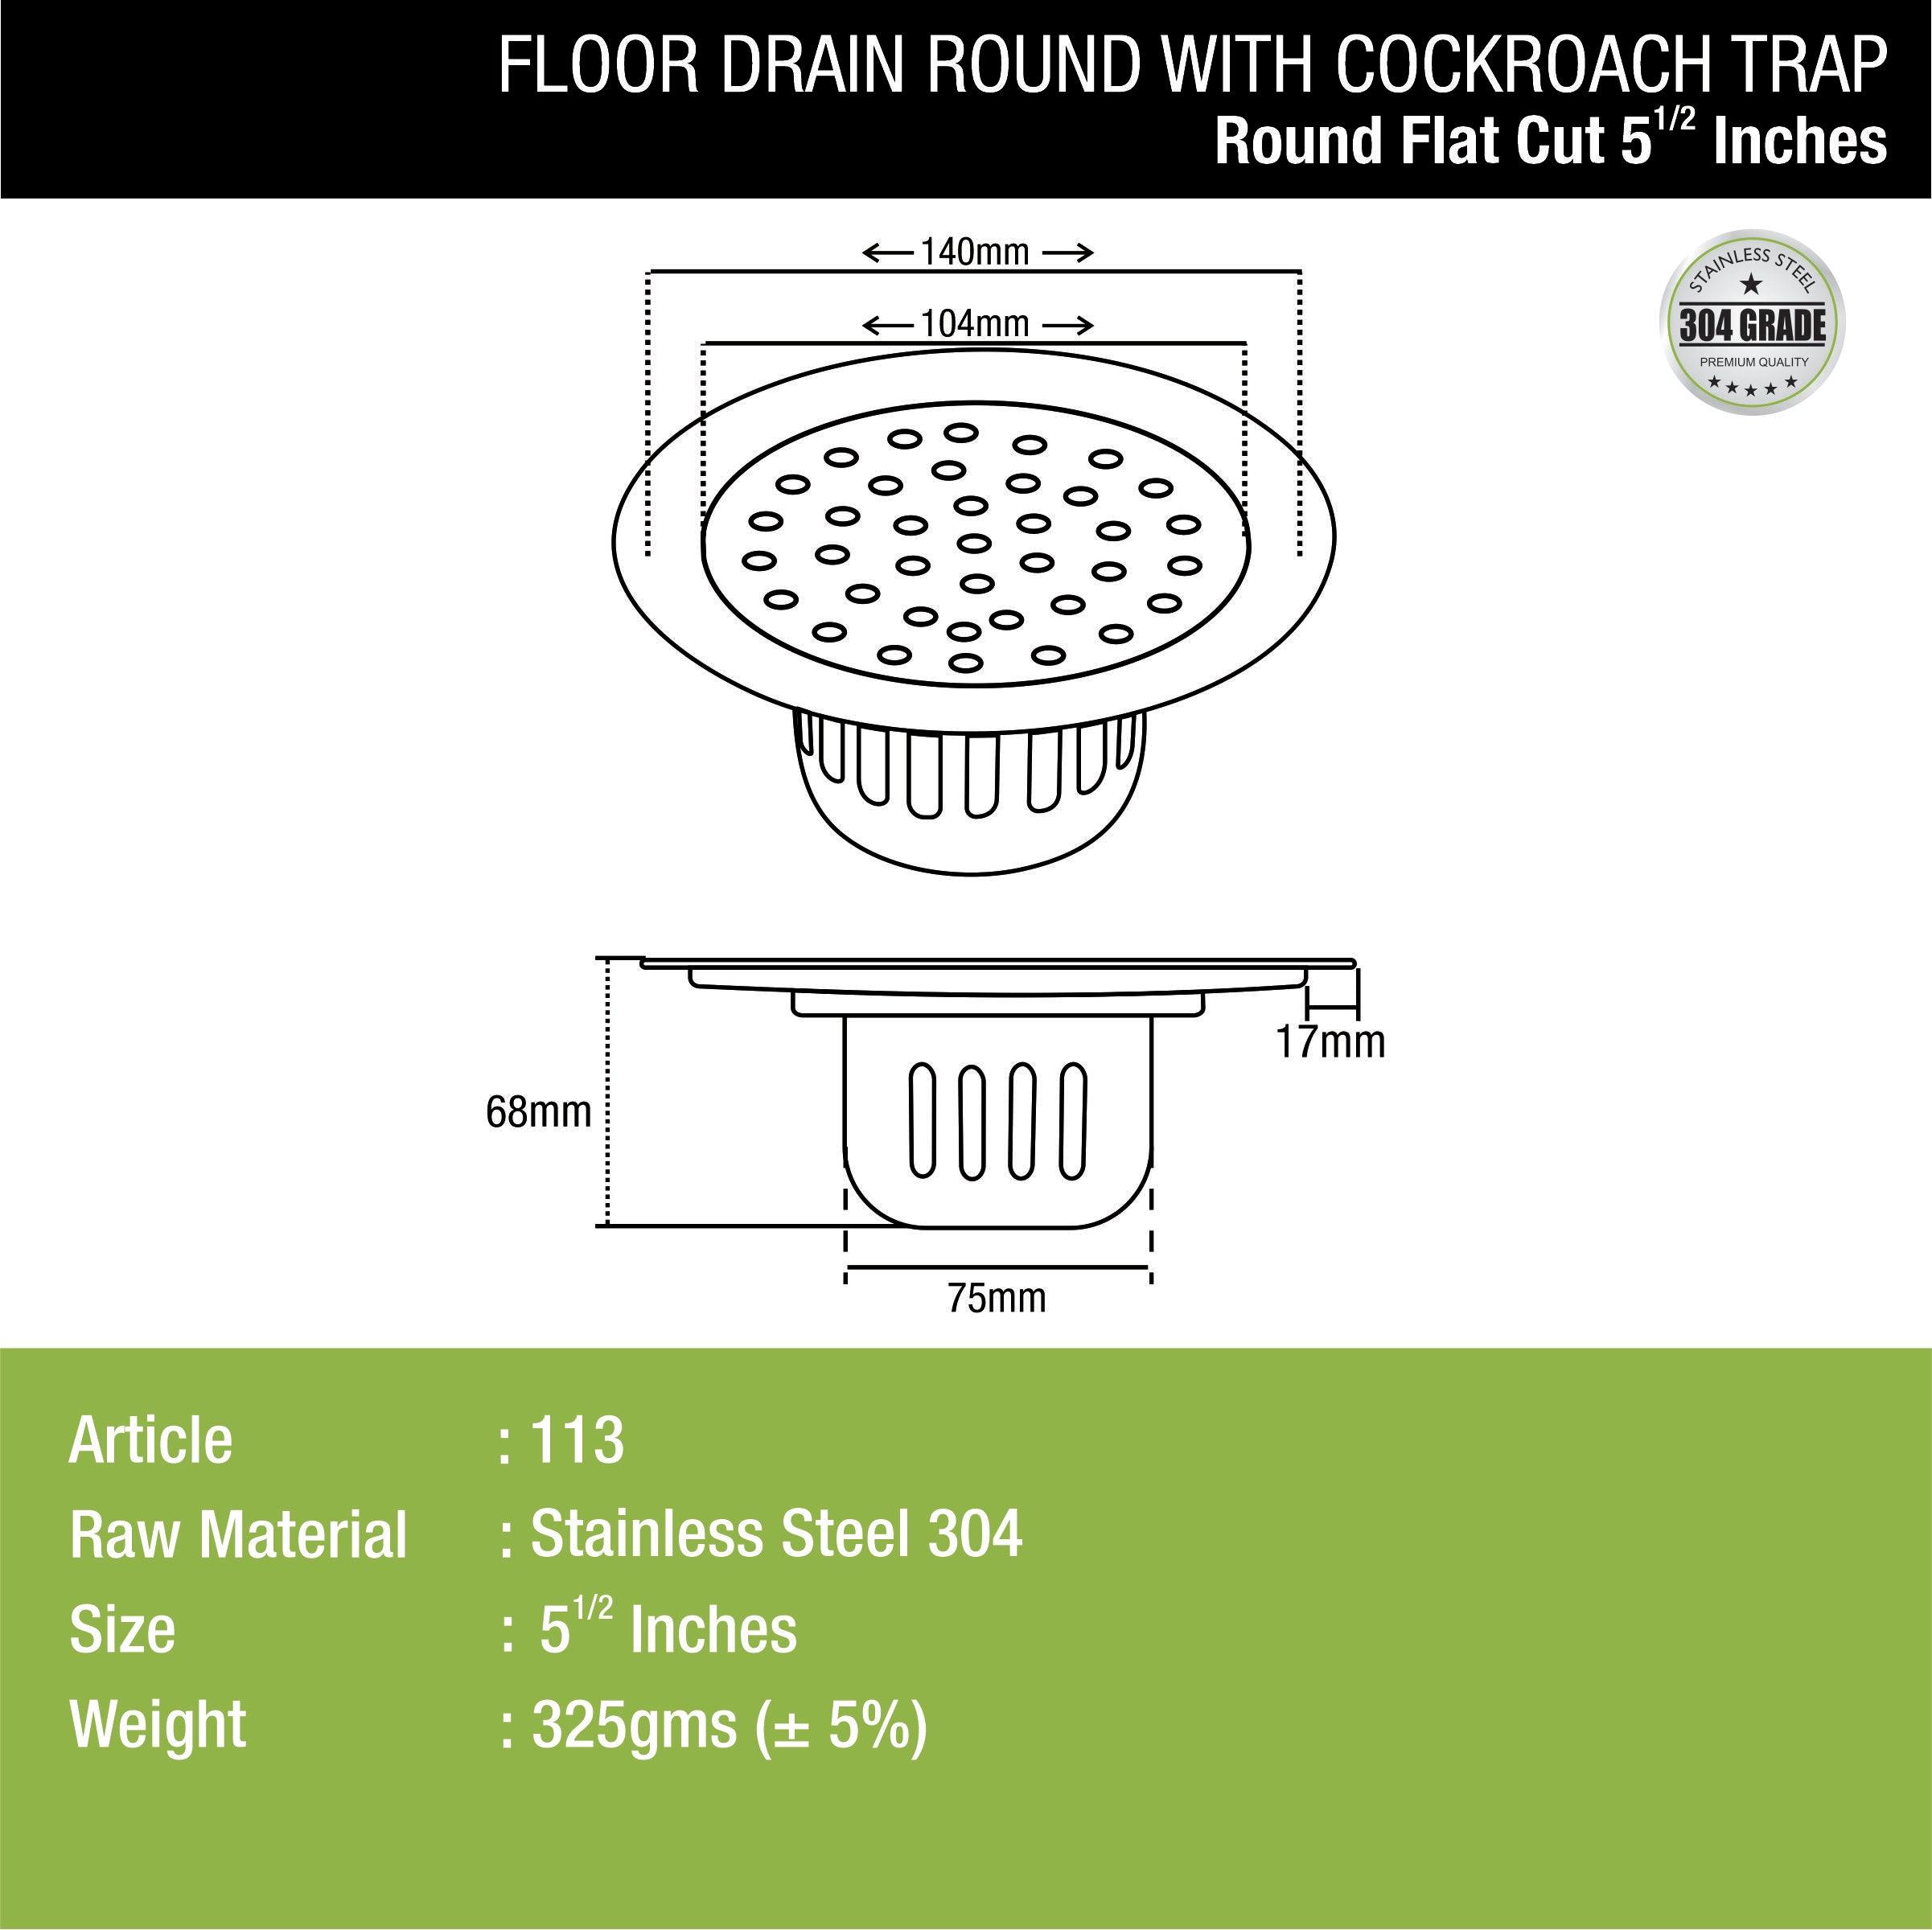 Round Flat Cut Floor Drain (5.5 inches) with Cockroach Trap dimensions and sizes